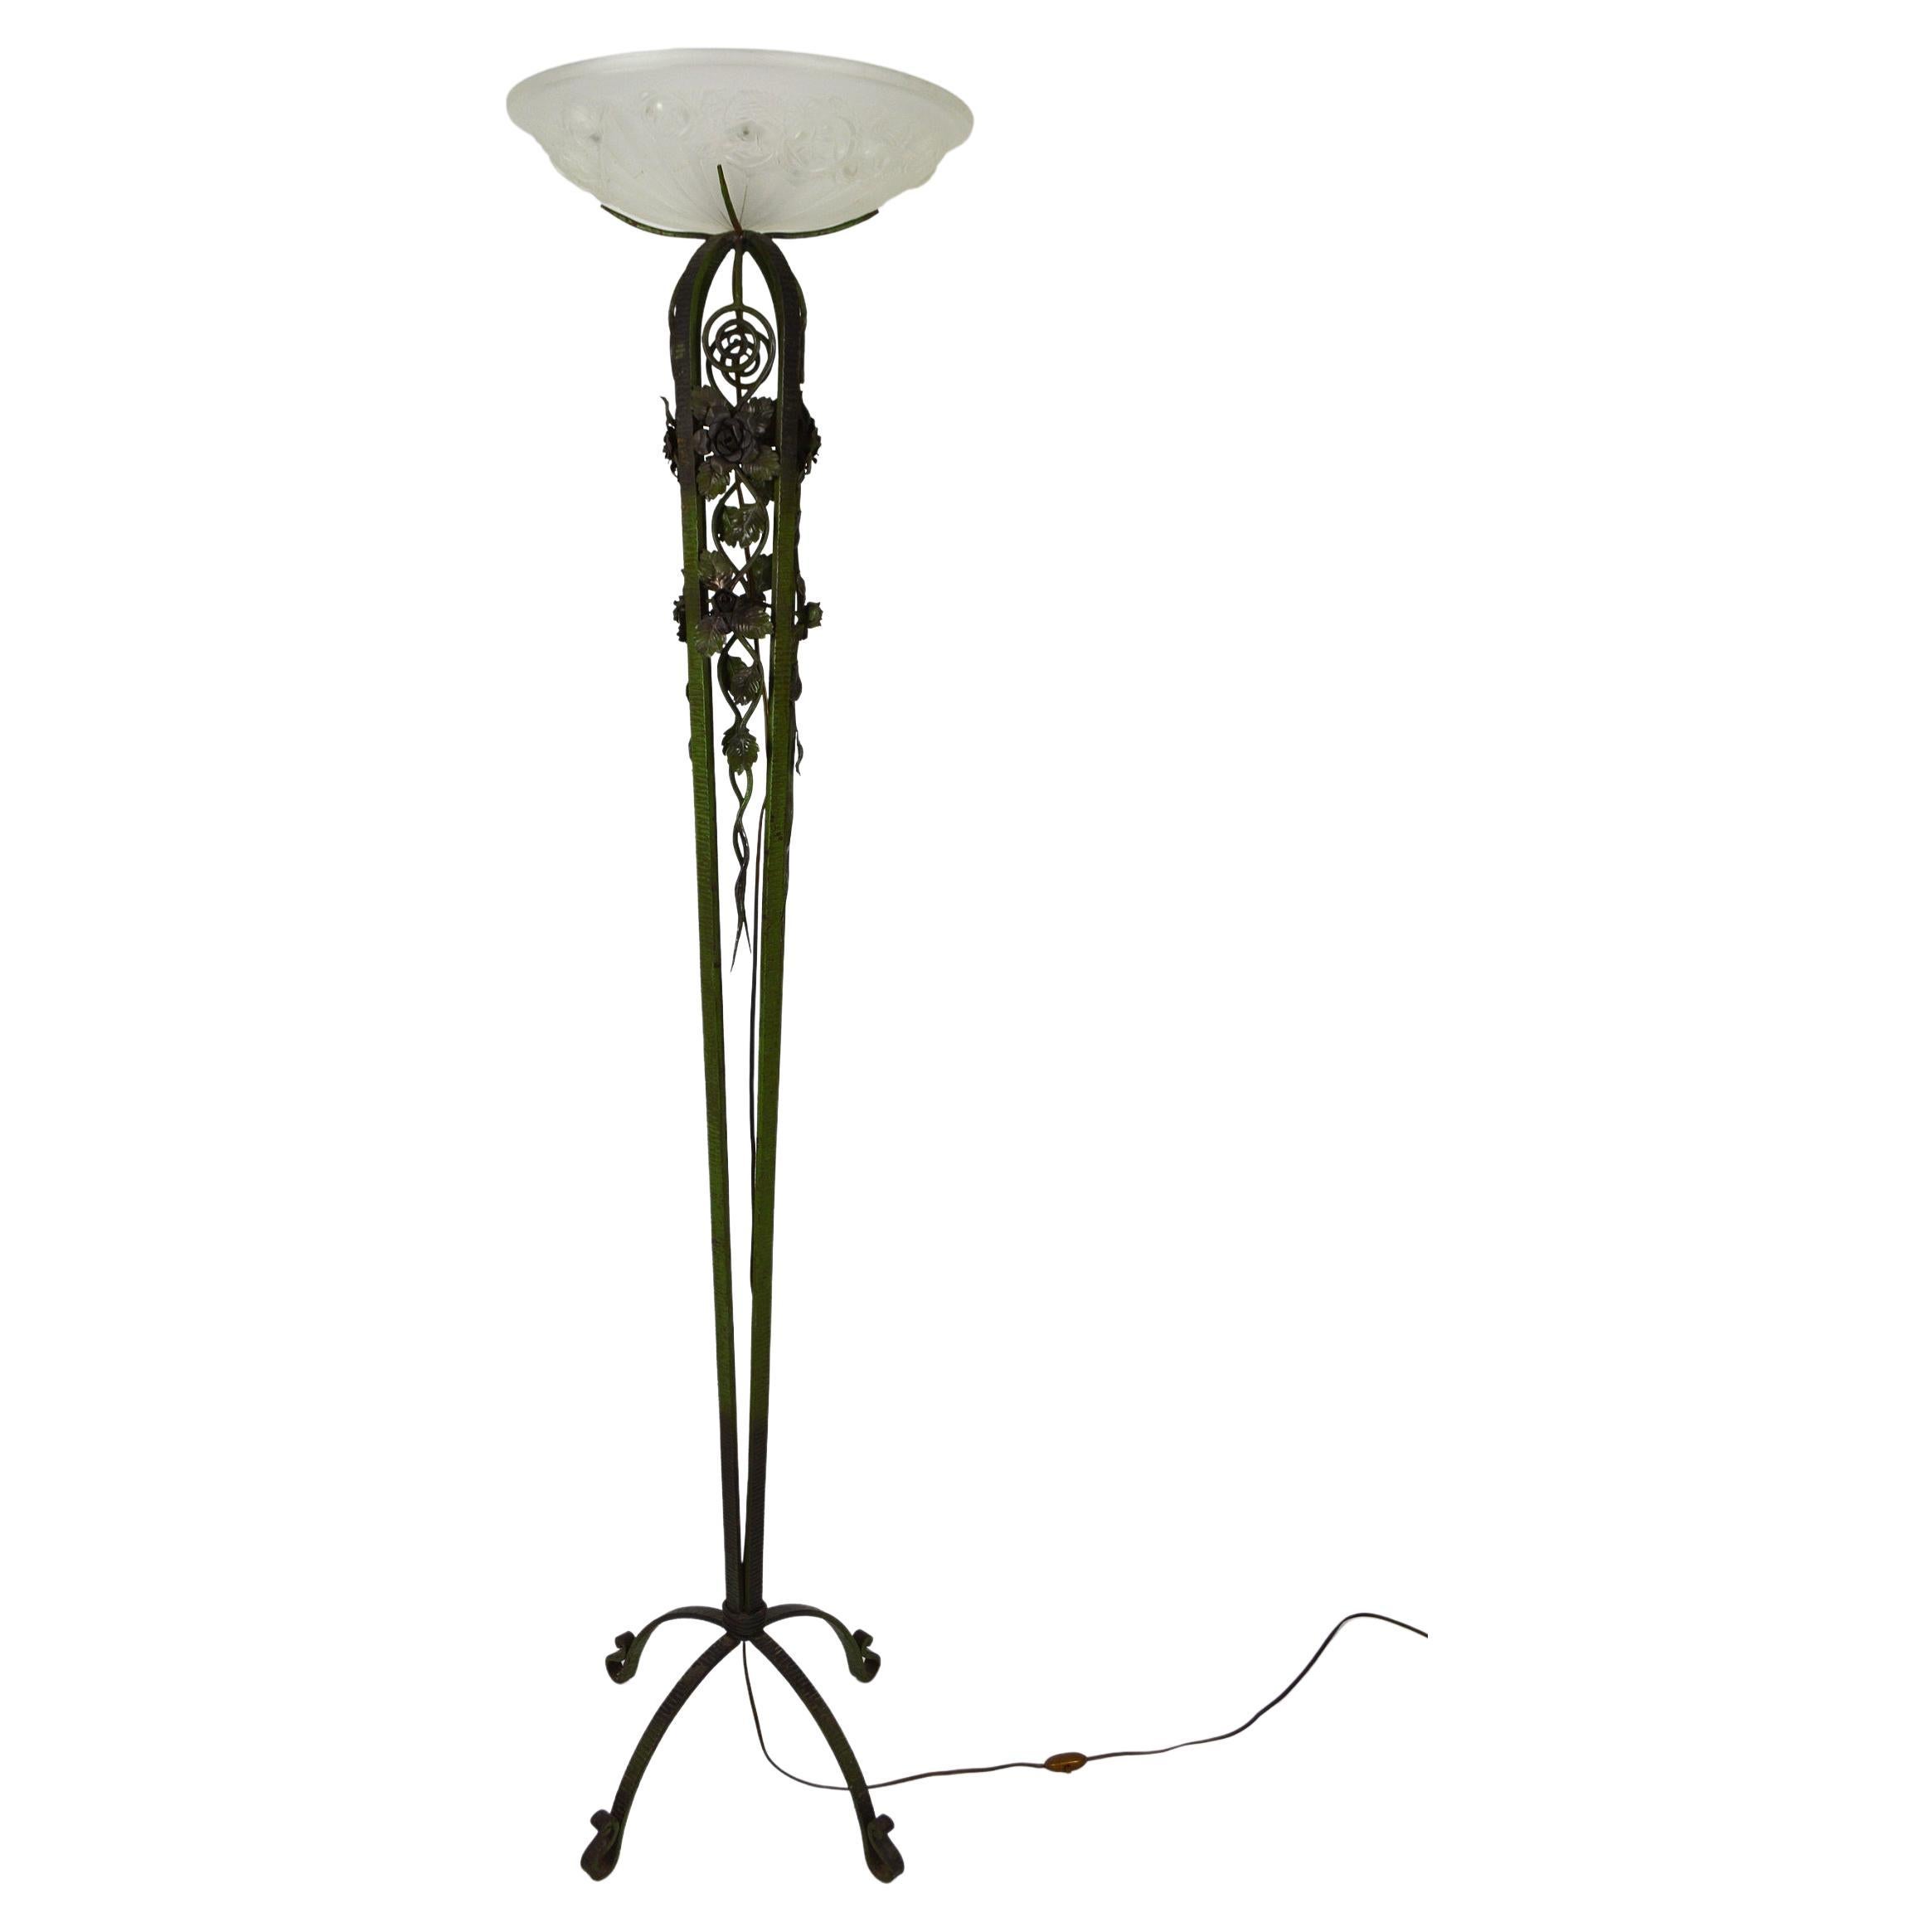 Art Deco Floor Lamp in Wrought Iron and Green Patina, France, circa 1930